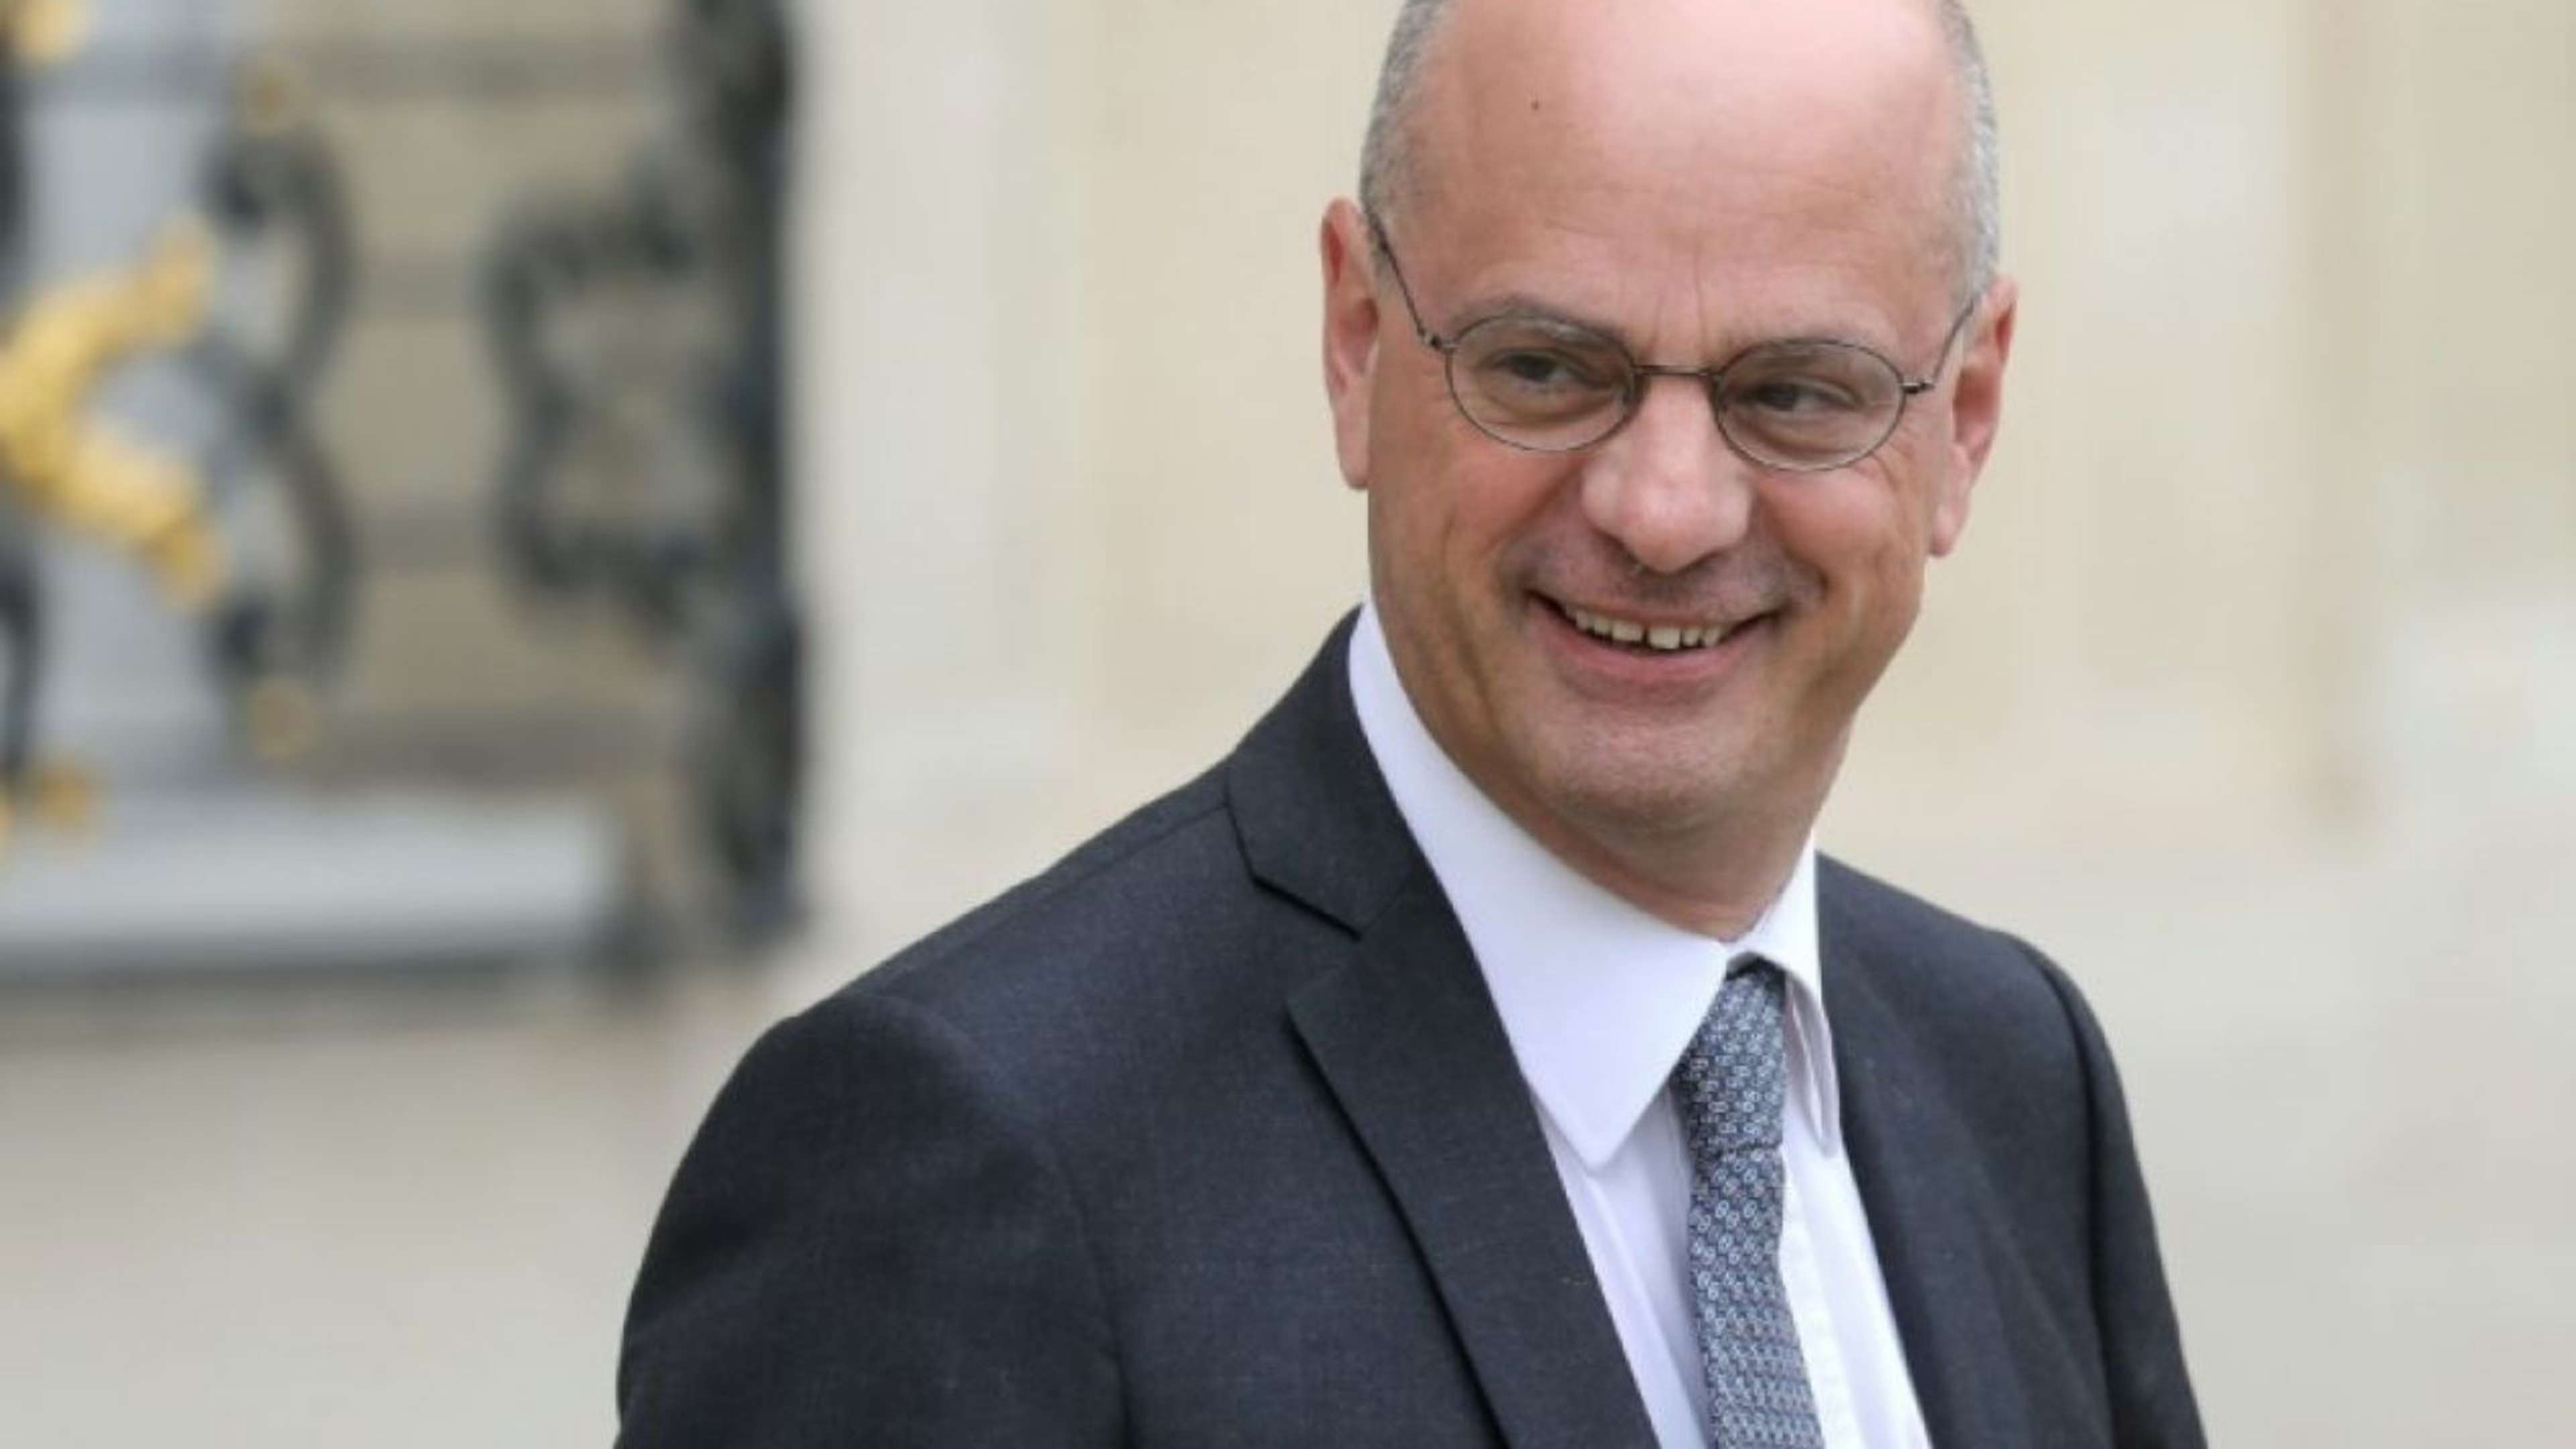 /2021/10/JEAN_MICHEL_BLANQUER_FORMATION_LAICITE